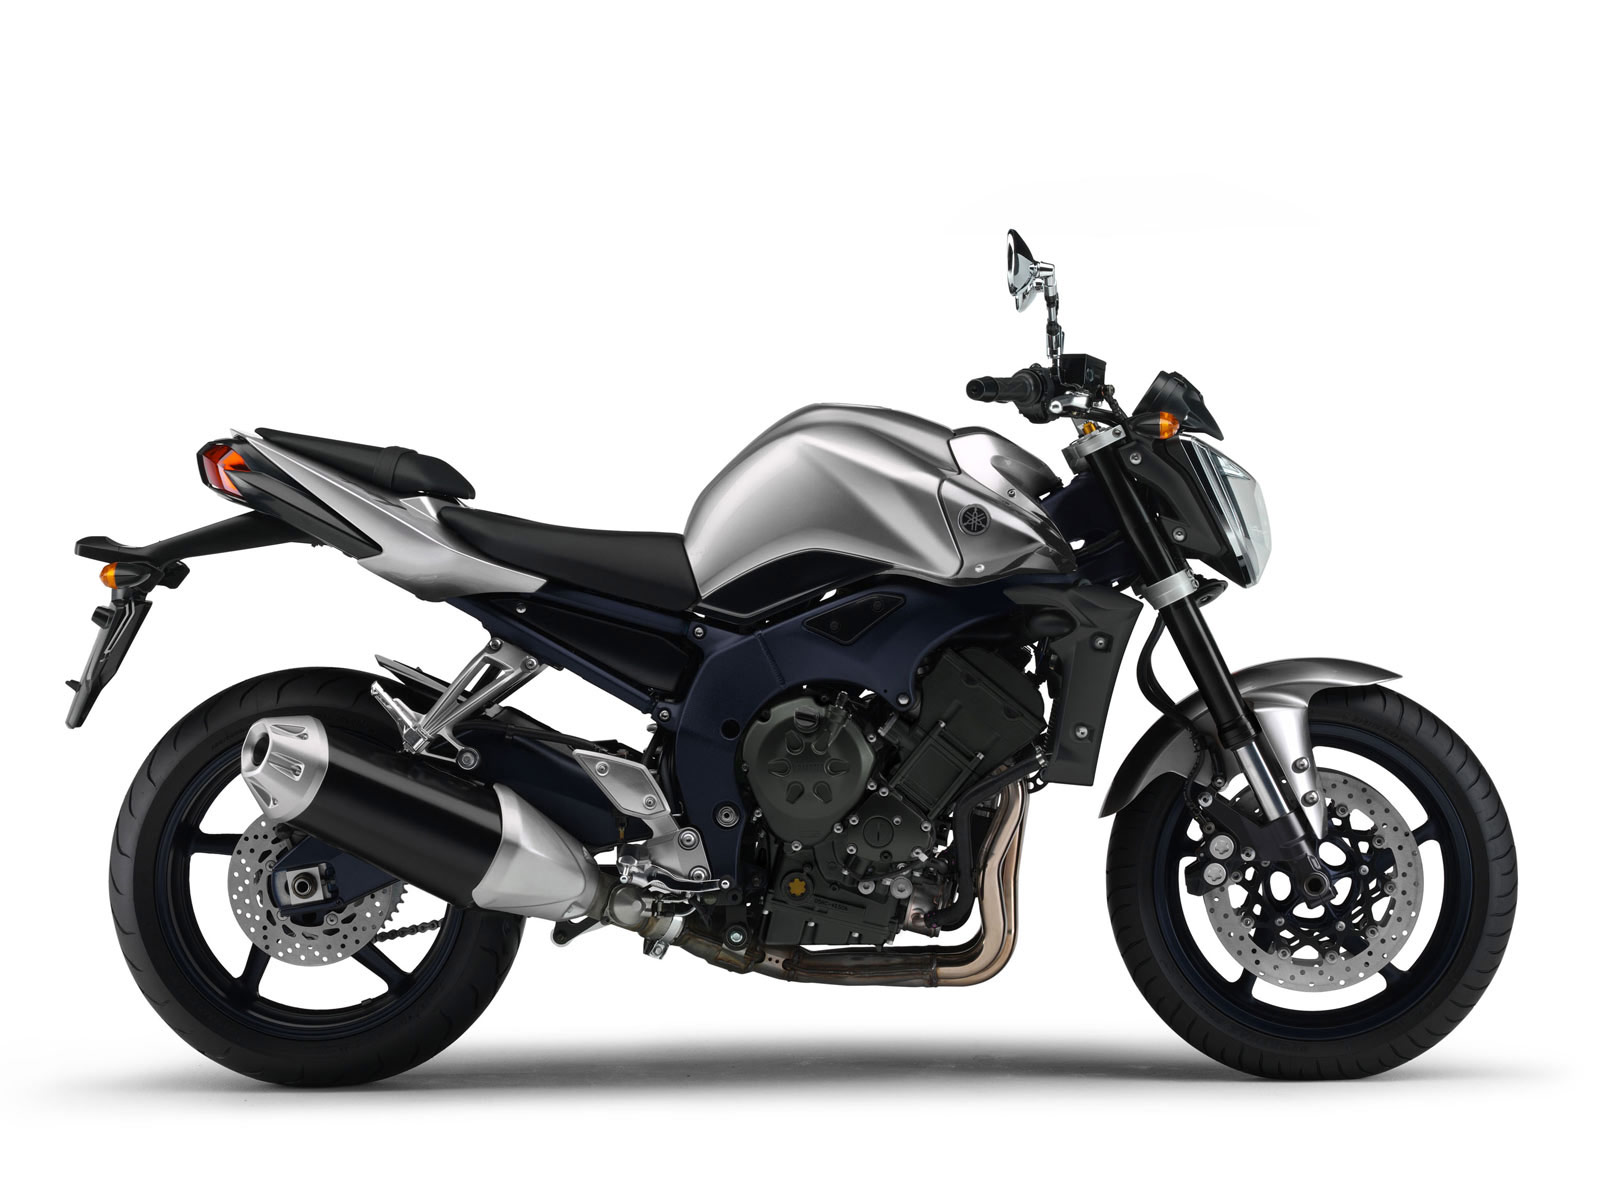 2006 YAMAHA FZ1 Accident Lawyers Info Pictures And Specs